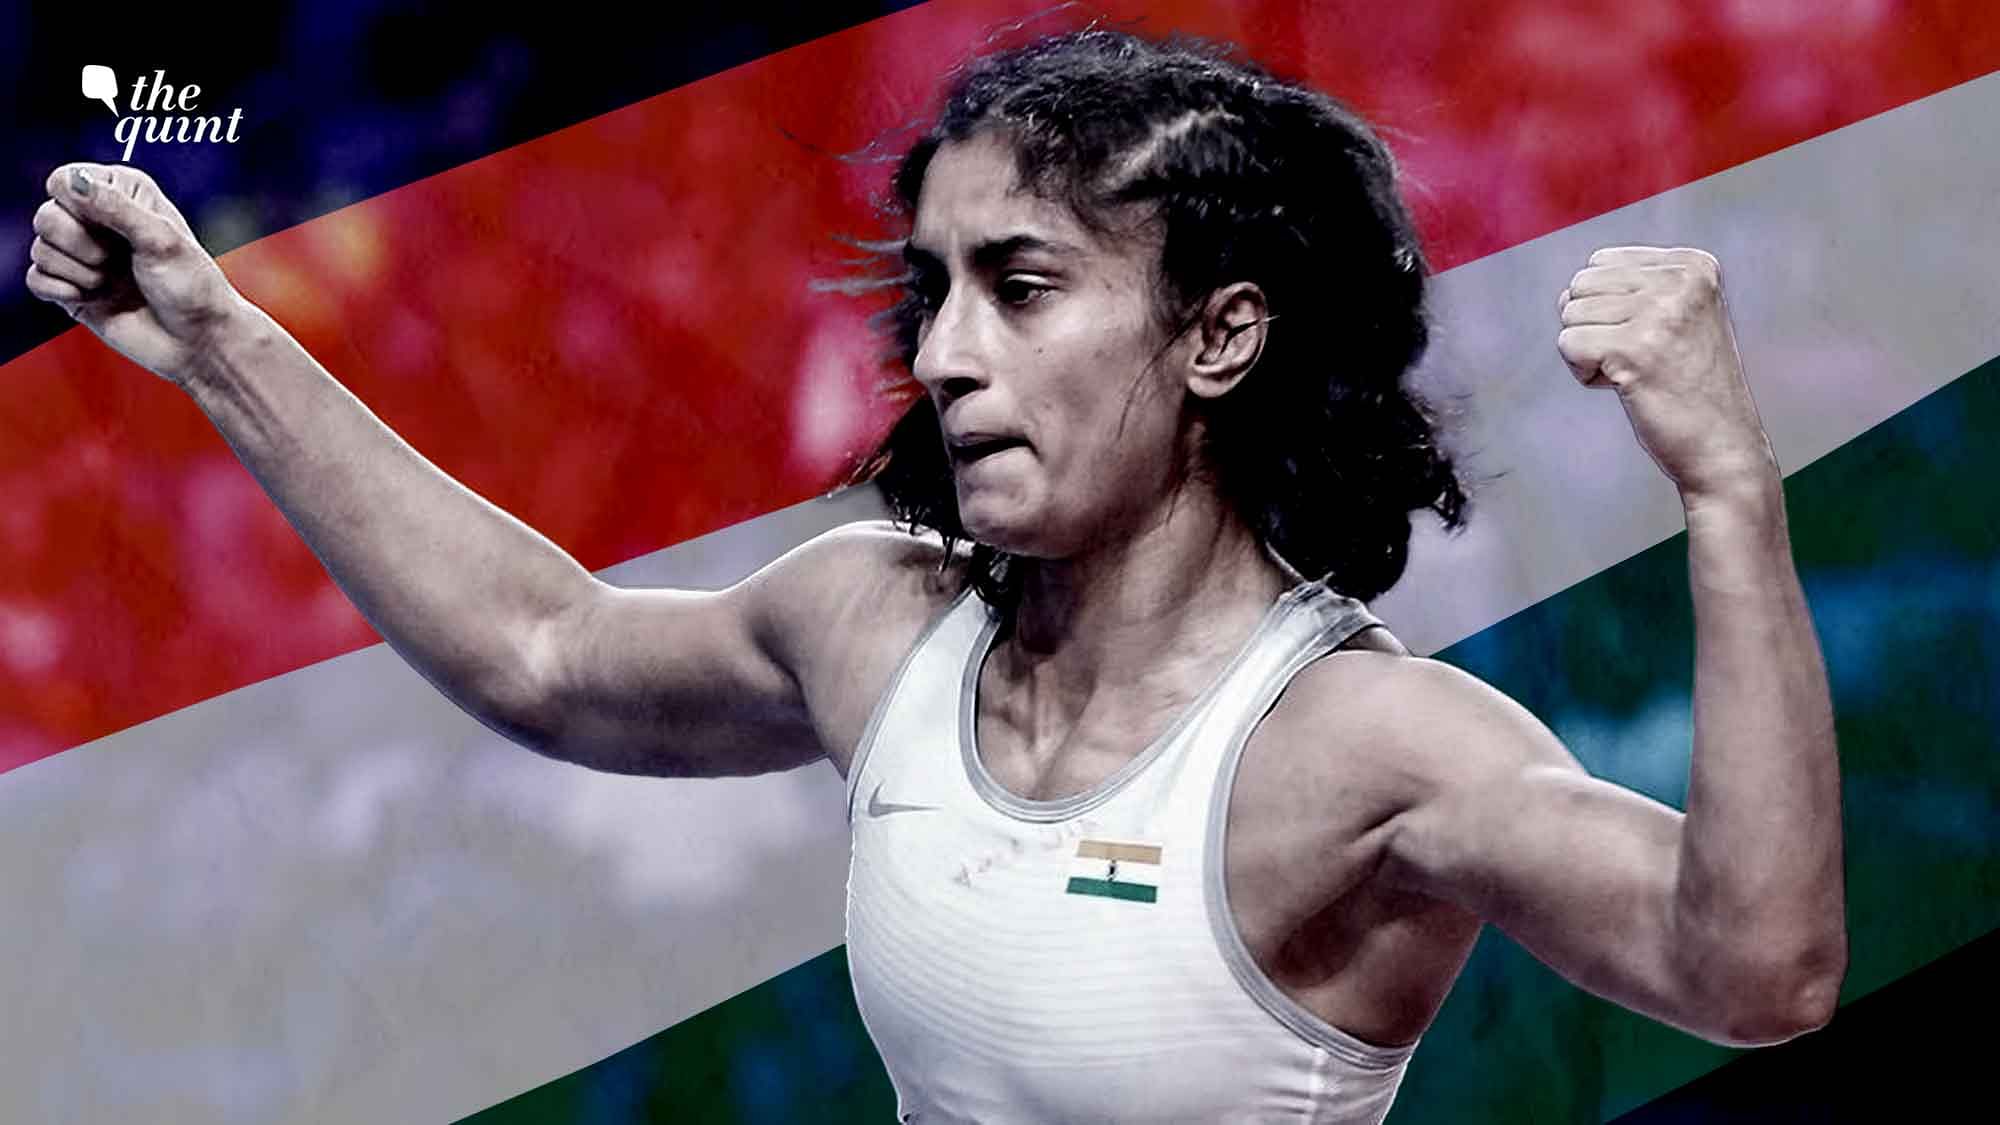 From Embracing Chaos To Shutting Noise, Vinesh Phogat Storms to Olympic Quota